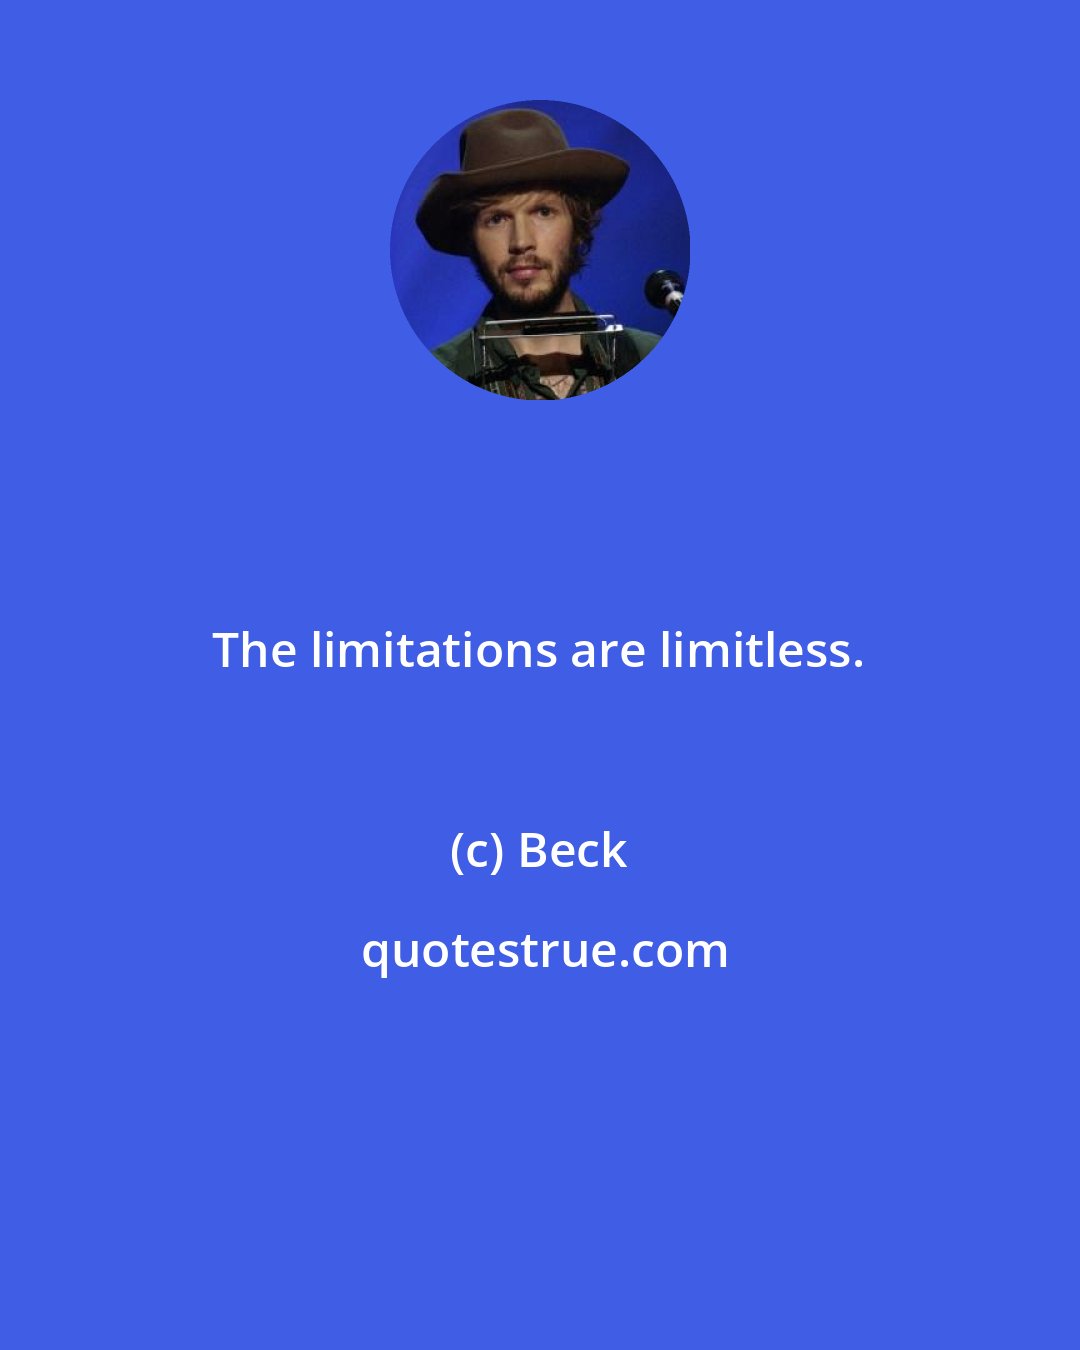 Beck: The limitations are limitless.